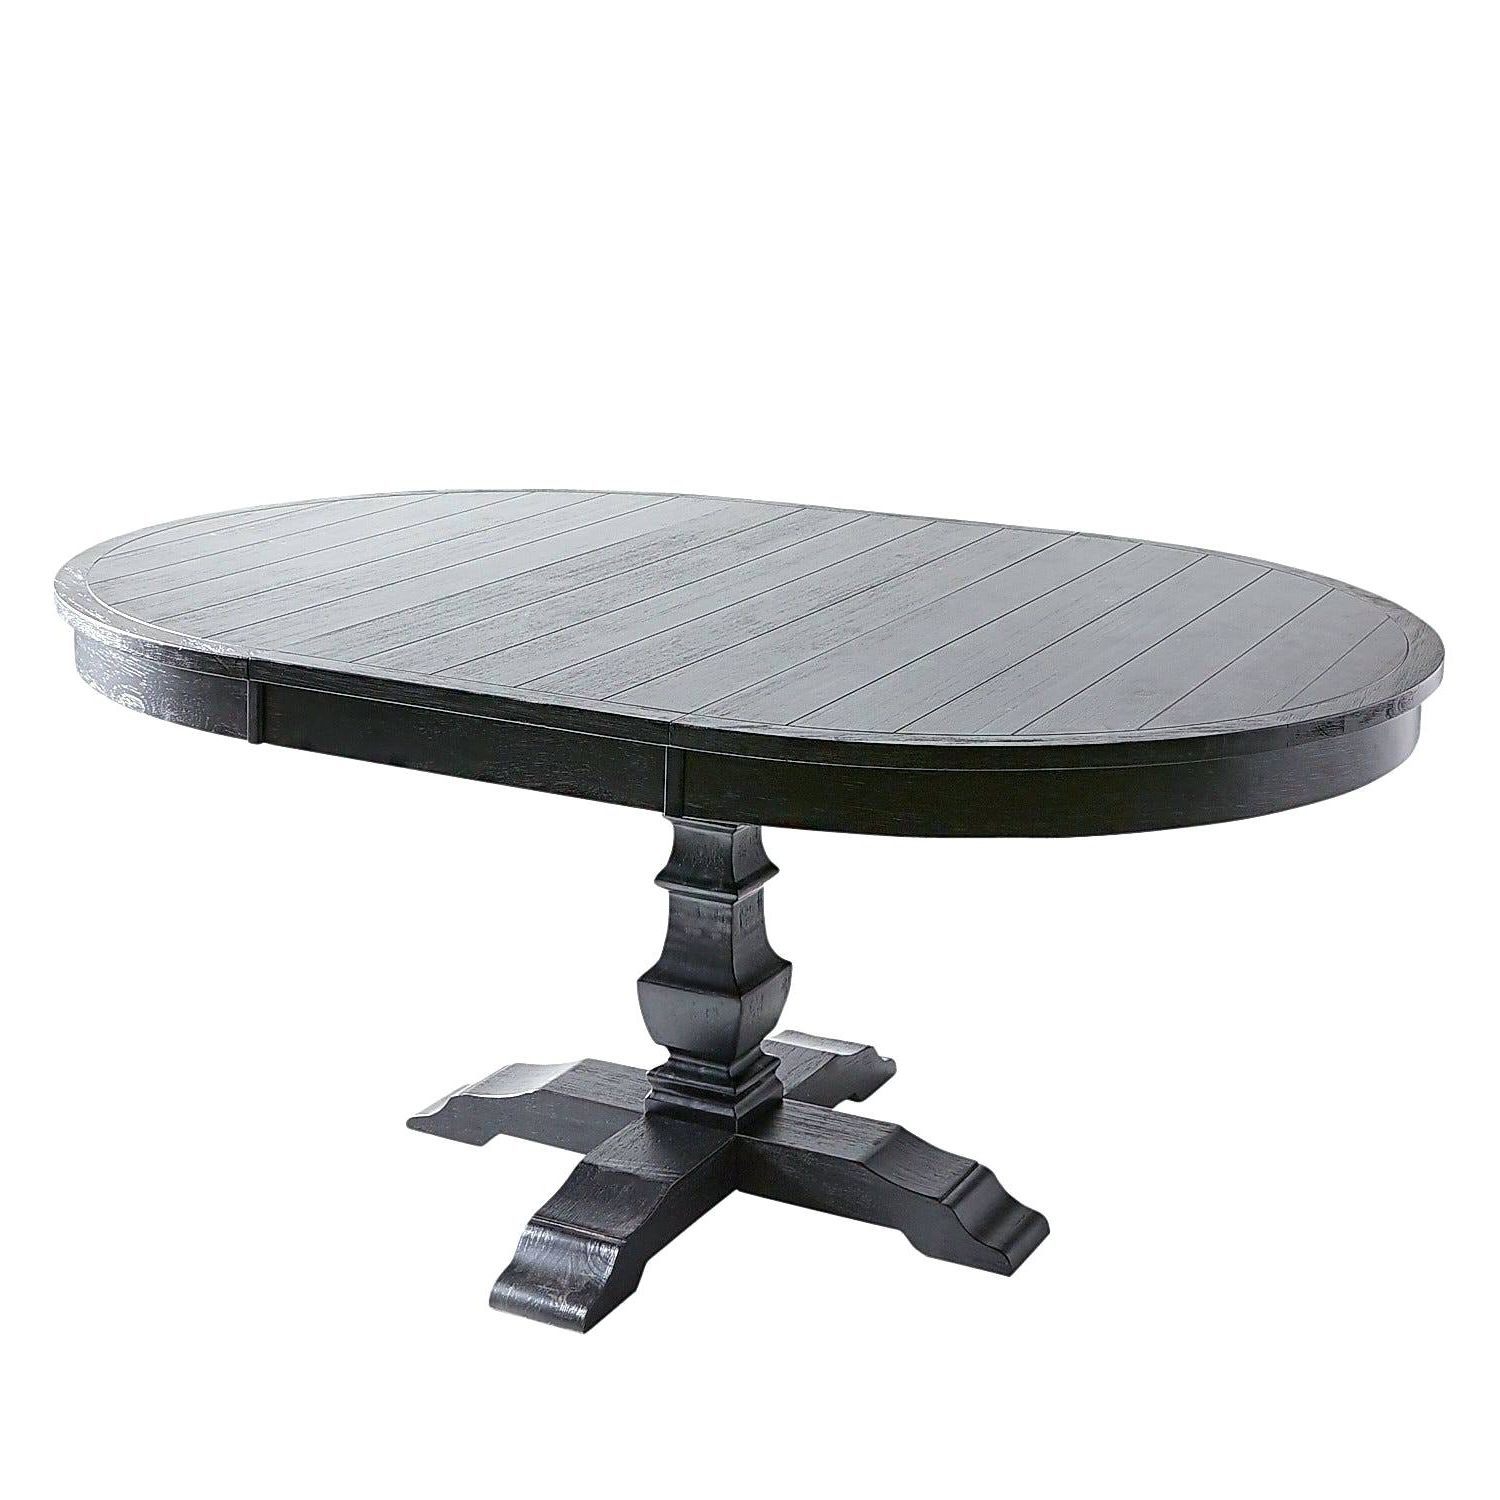 Fashionable Johnson Round Pedestal Dining Tables Regarding Round Dining Table Base Pier 1 – Jennyjohnson (View 22 of 25)